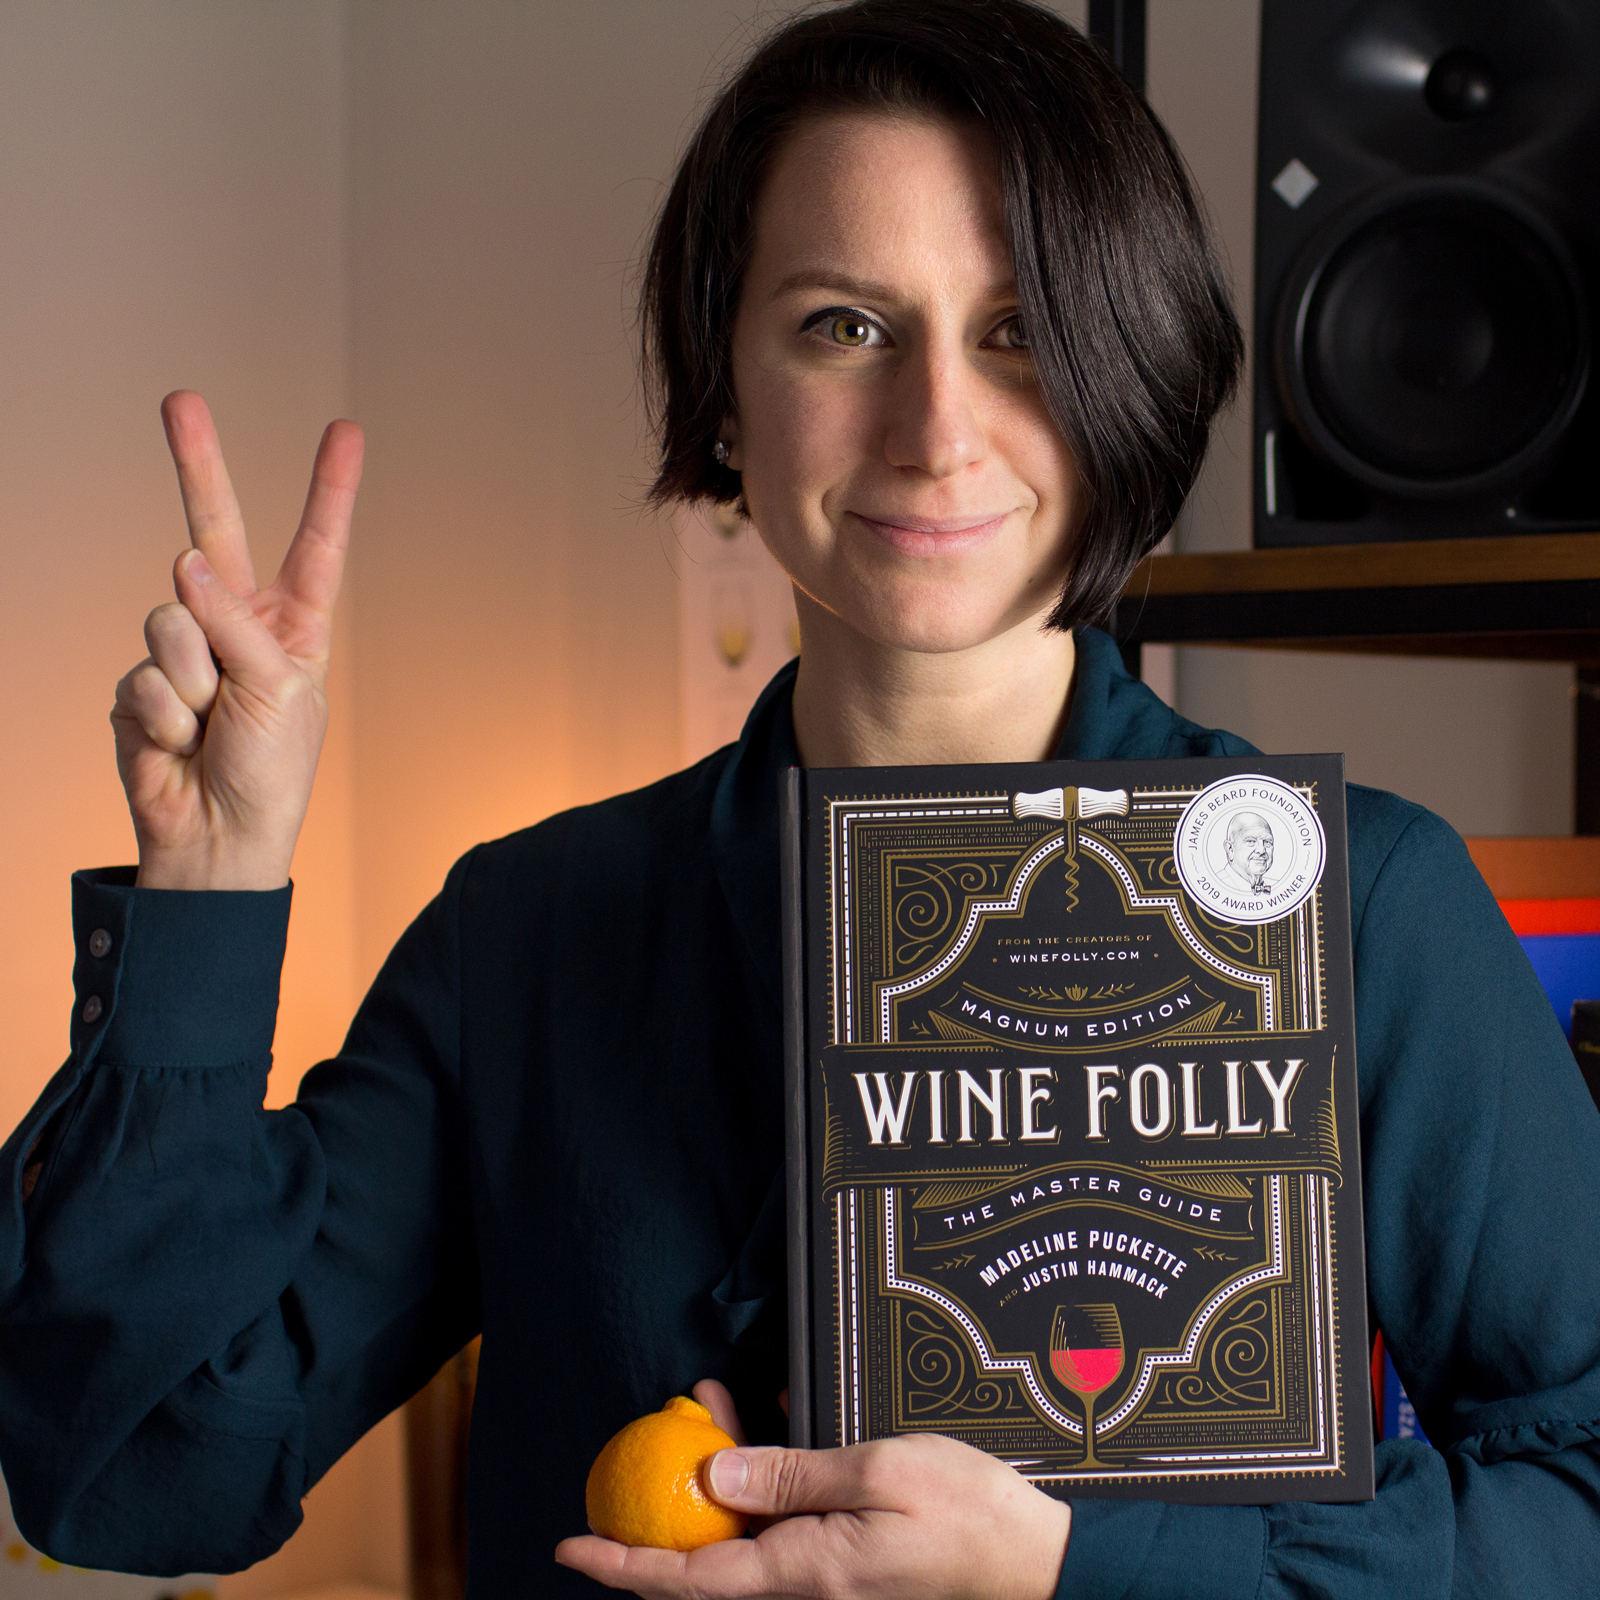 Madeline Puckette - Wine Folly: Magnum Edition Book - Author 2019